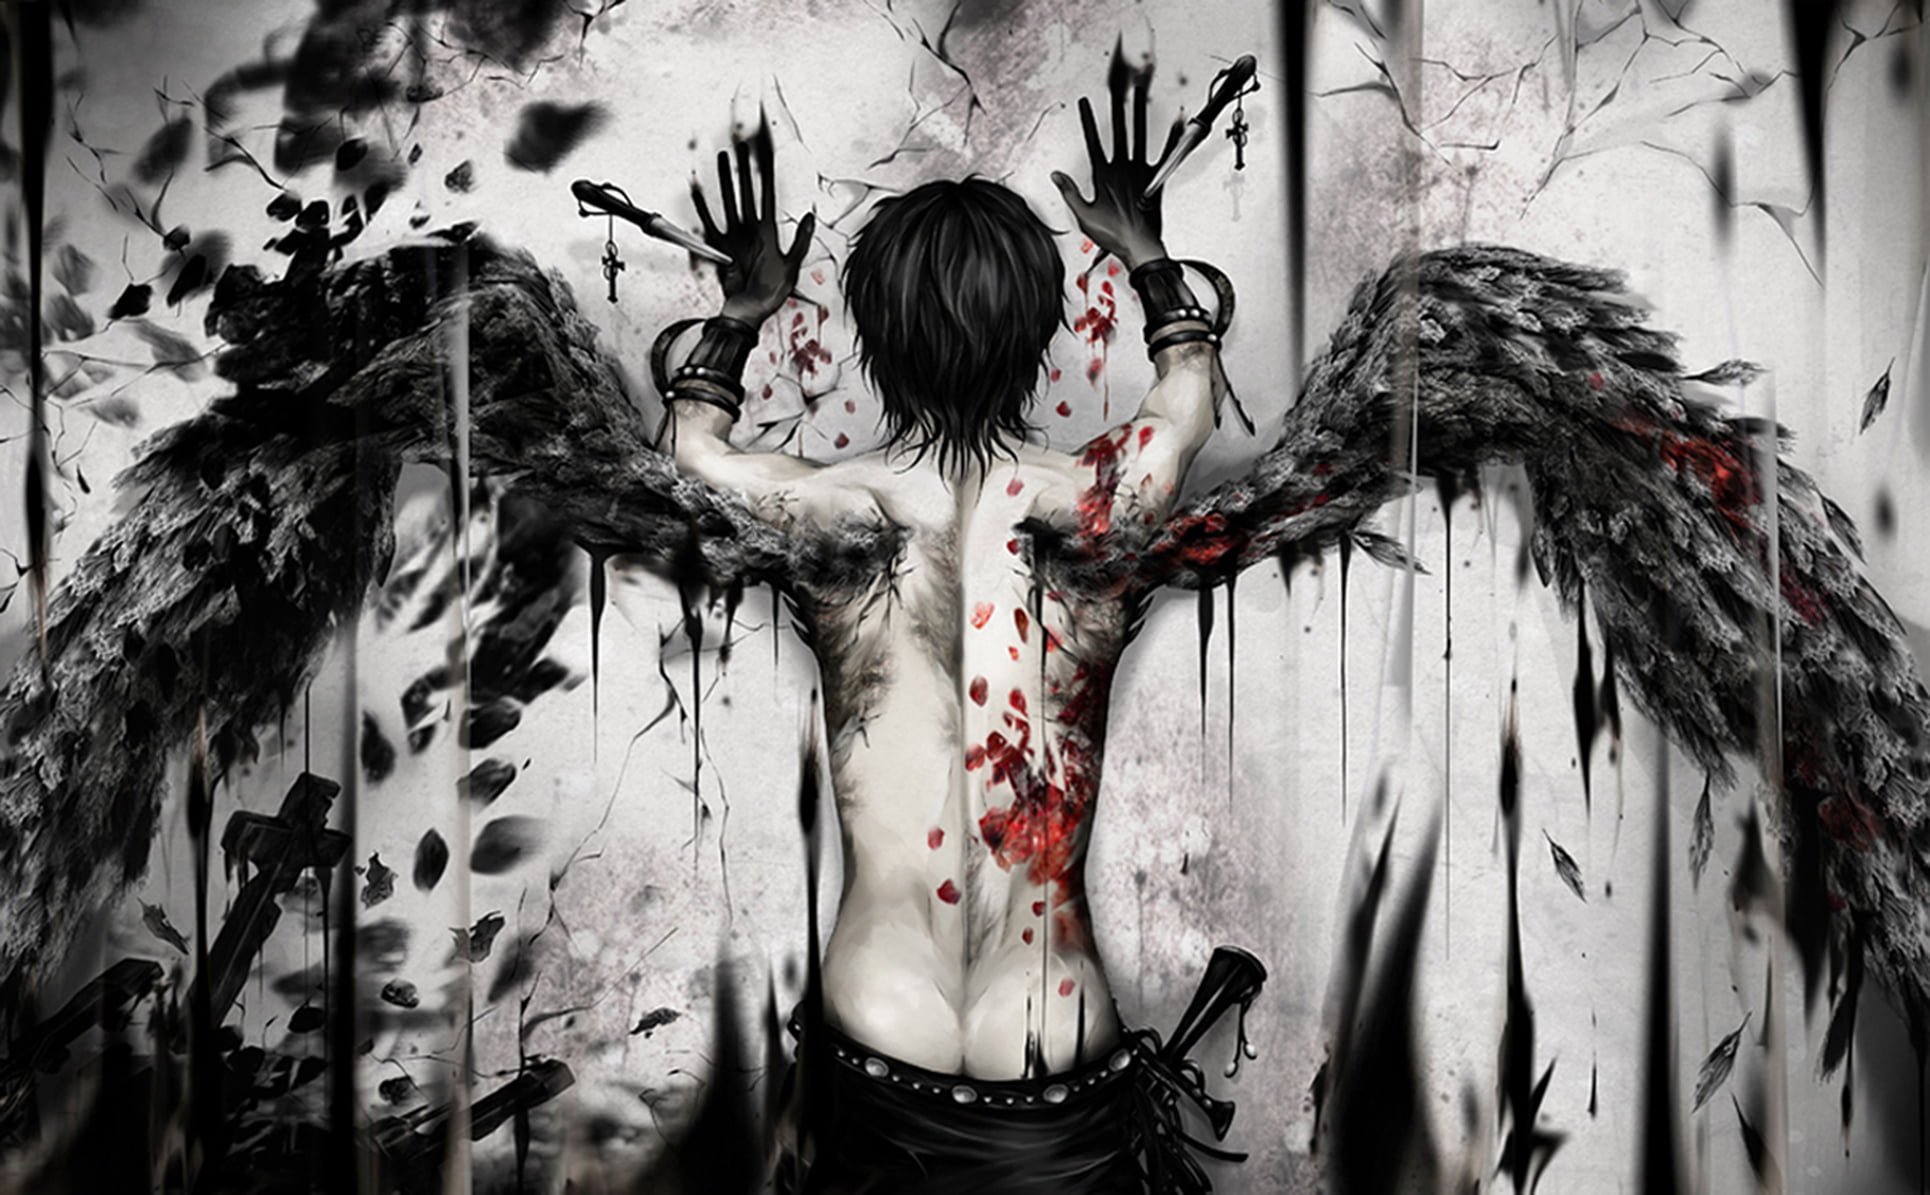 topless man with wings illustration, crosses, blood, petals, Guy